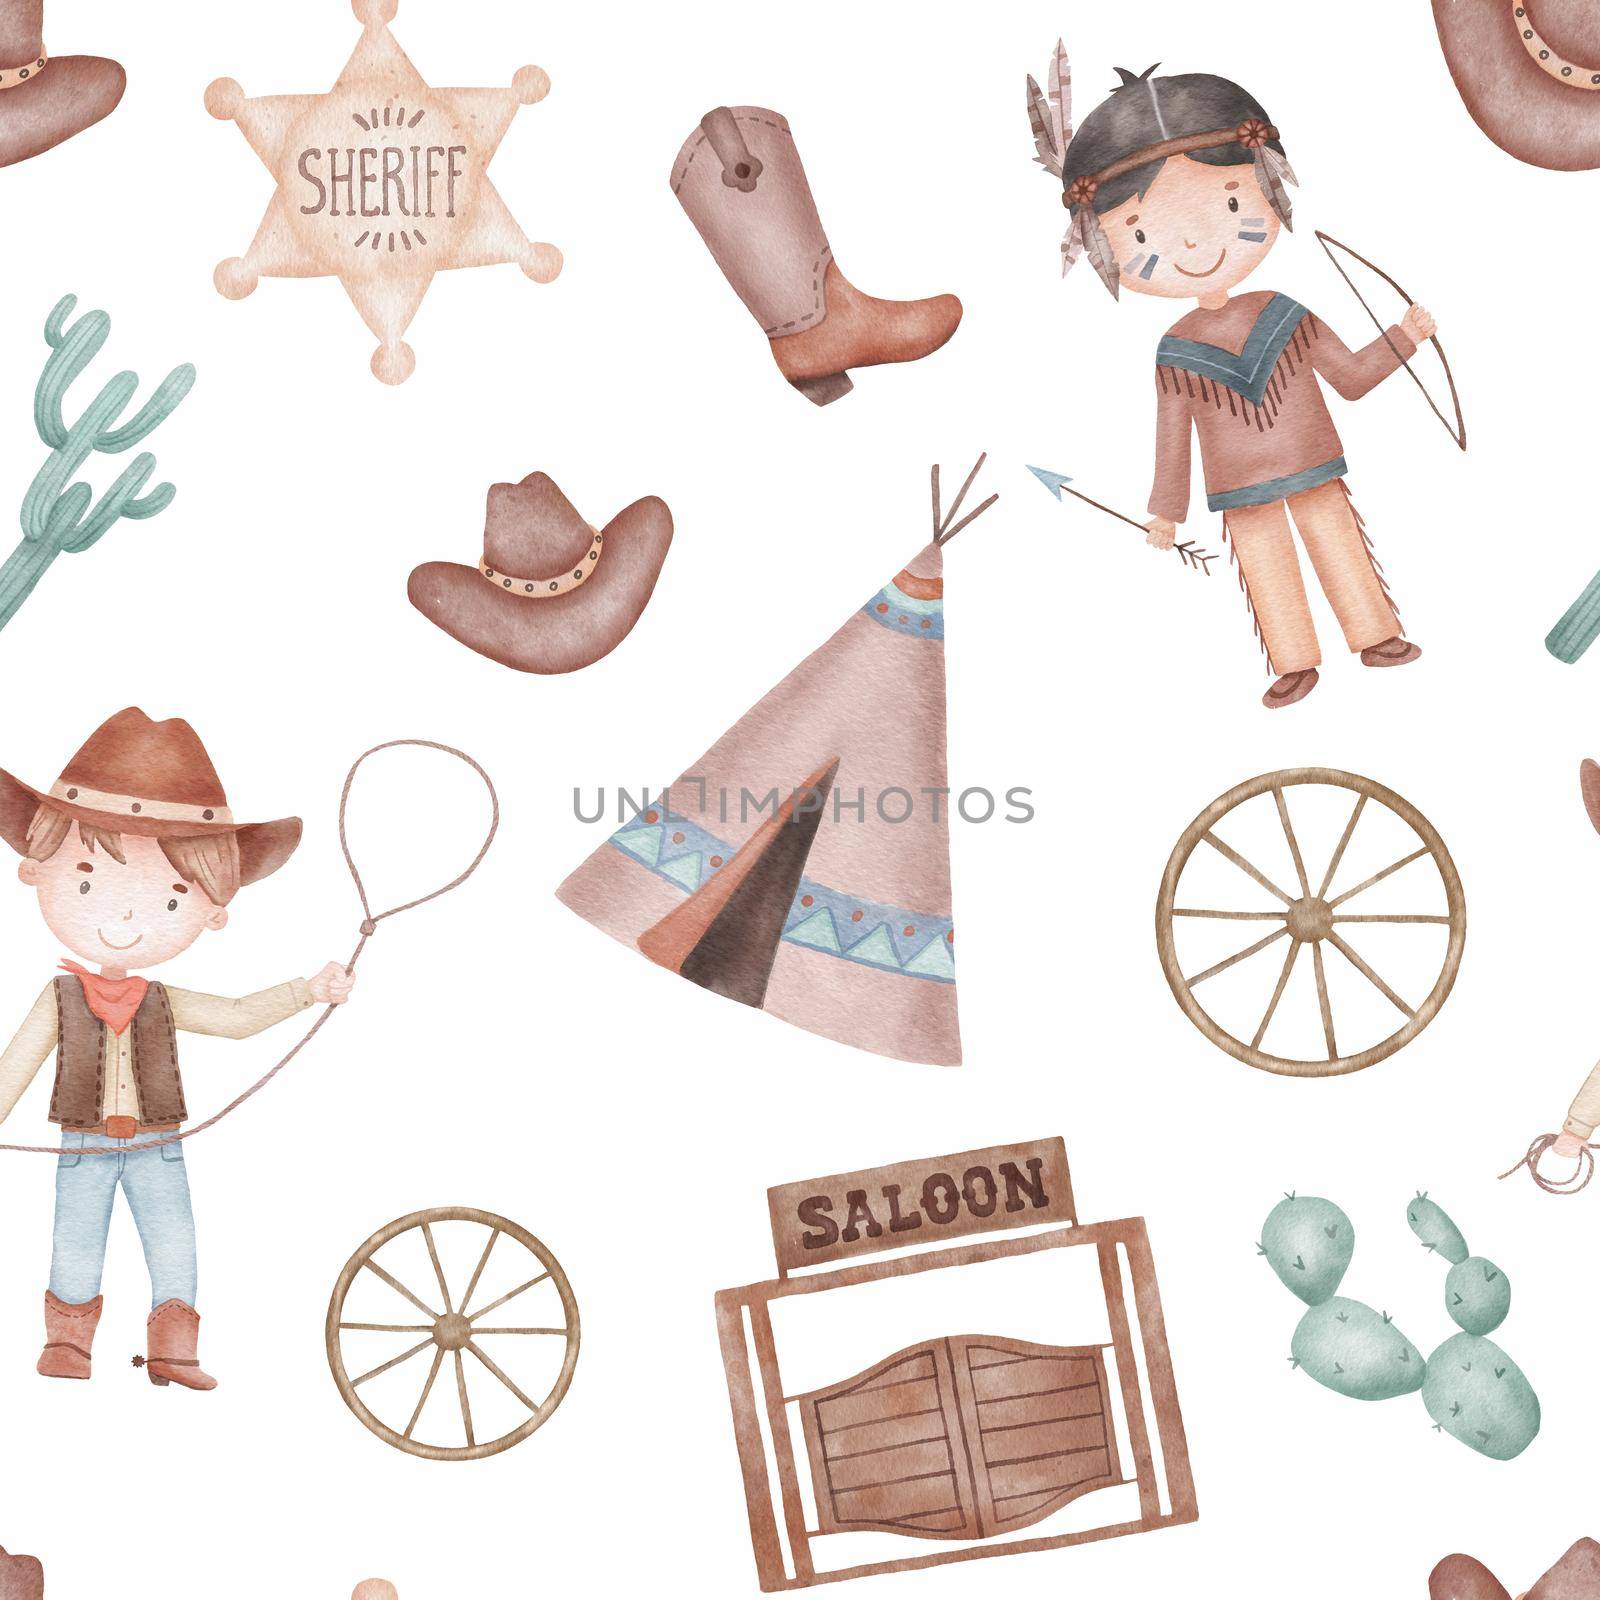 Watercolor hand drawn seamless pattern with indian boy in costume and cowboy with rope lasso. Cute childish illustration on white background. Wild west theme